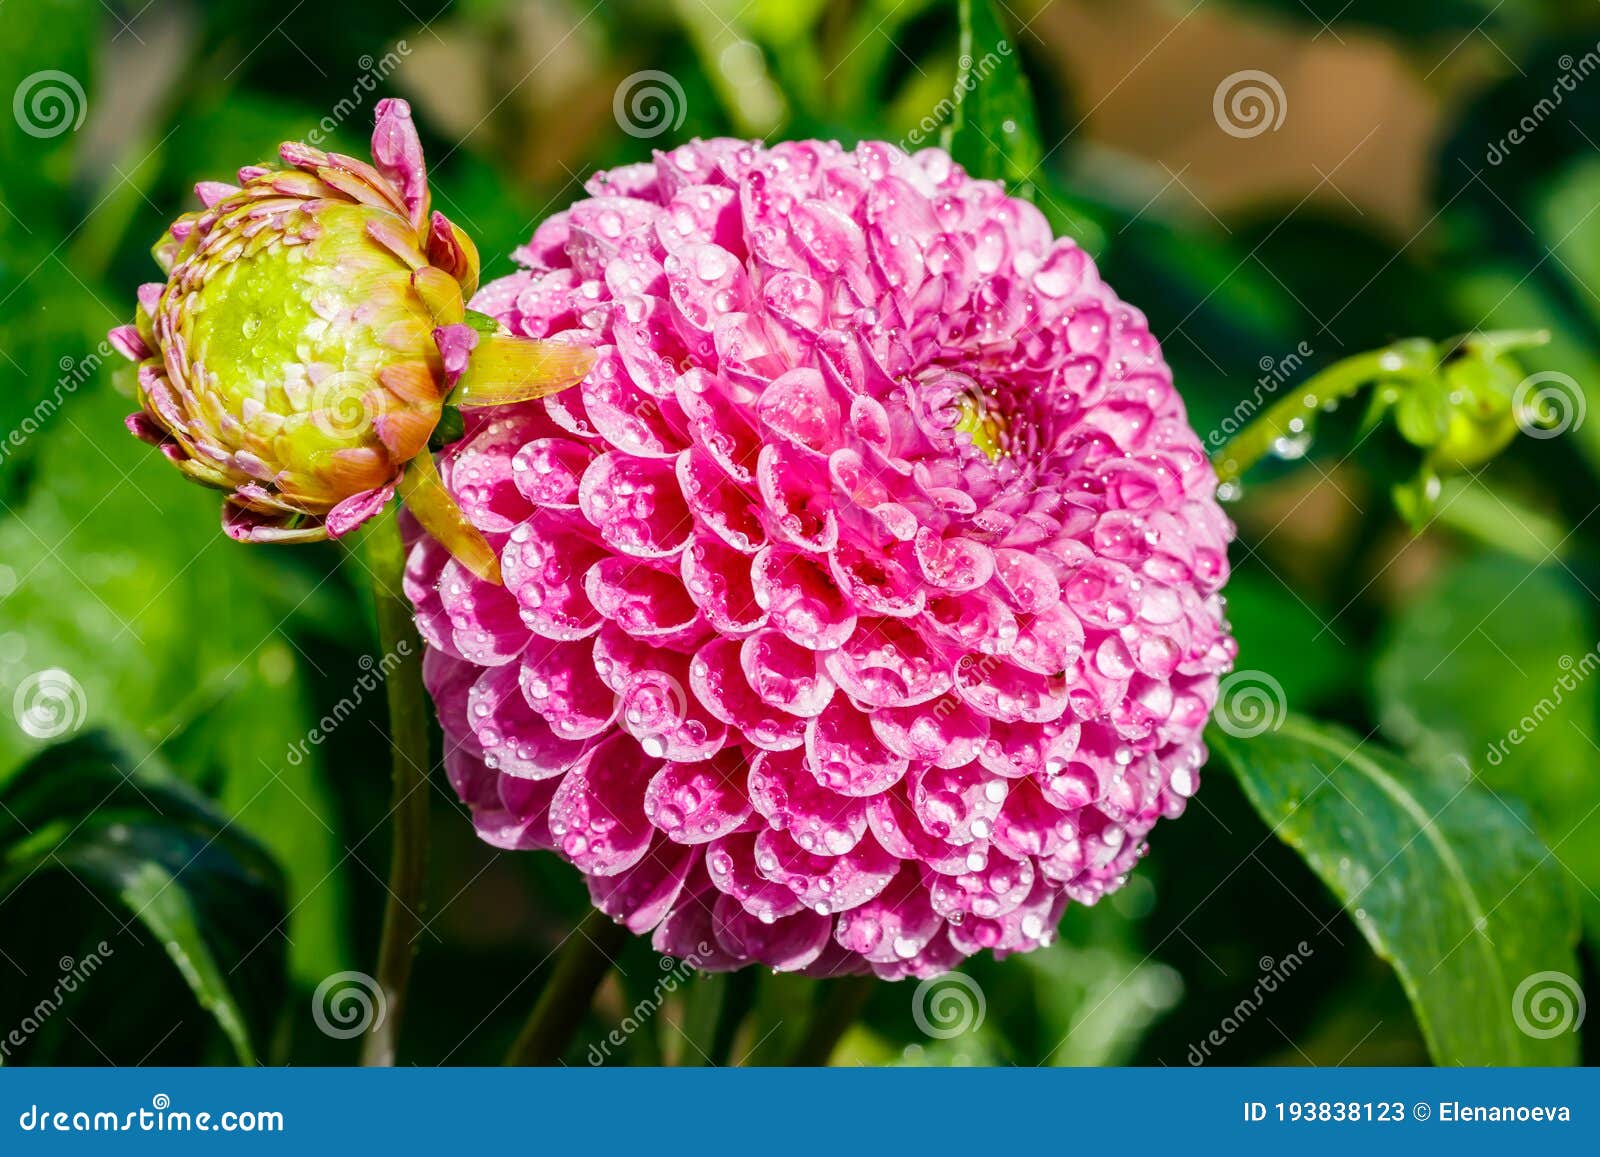 Pink Dahlia Flower With Raindrops Growing In The Garden Stock Image Image Of Bloom Raindrops